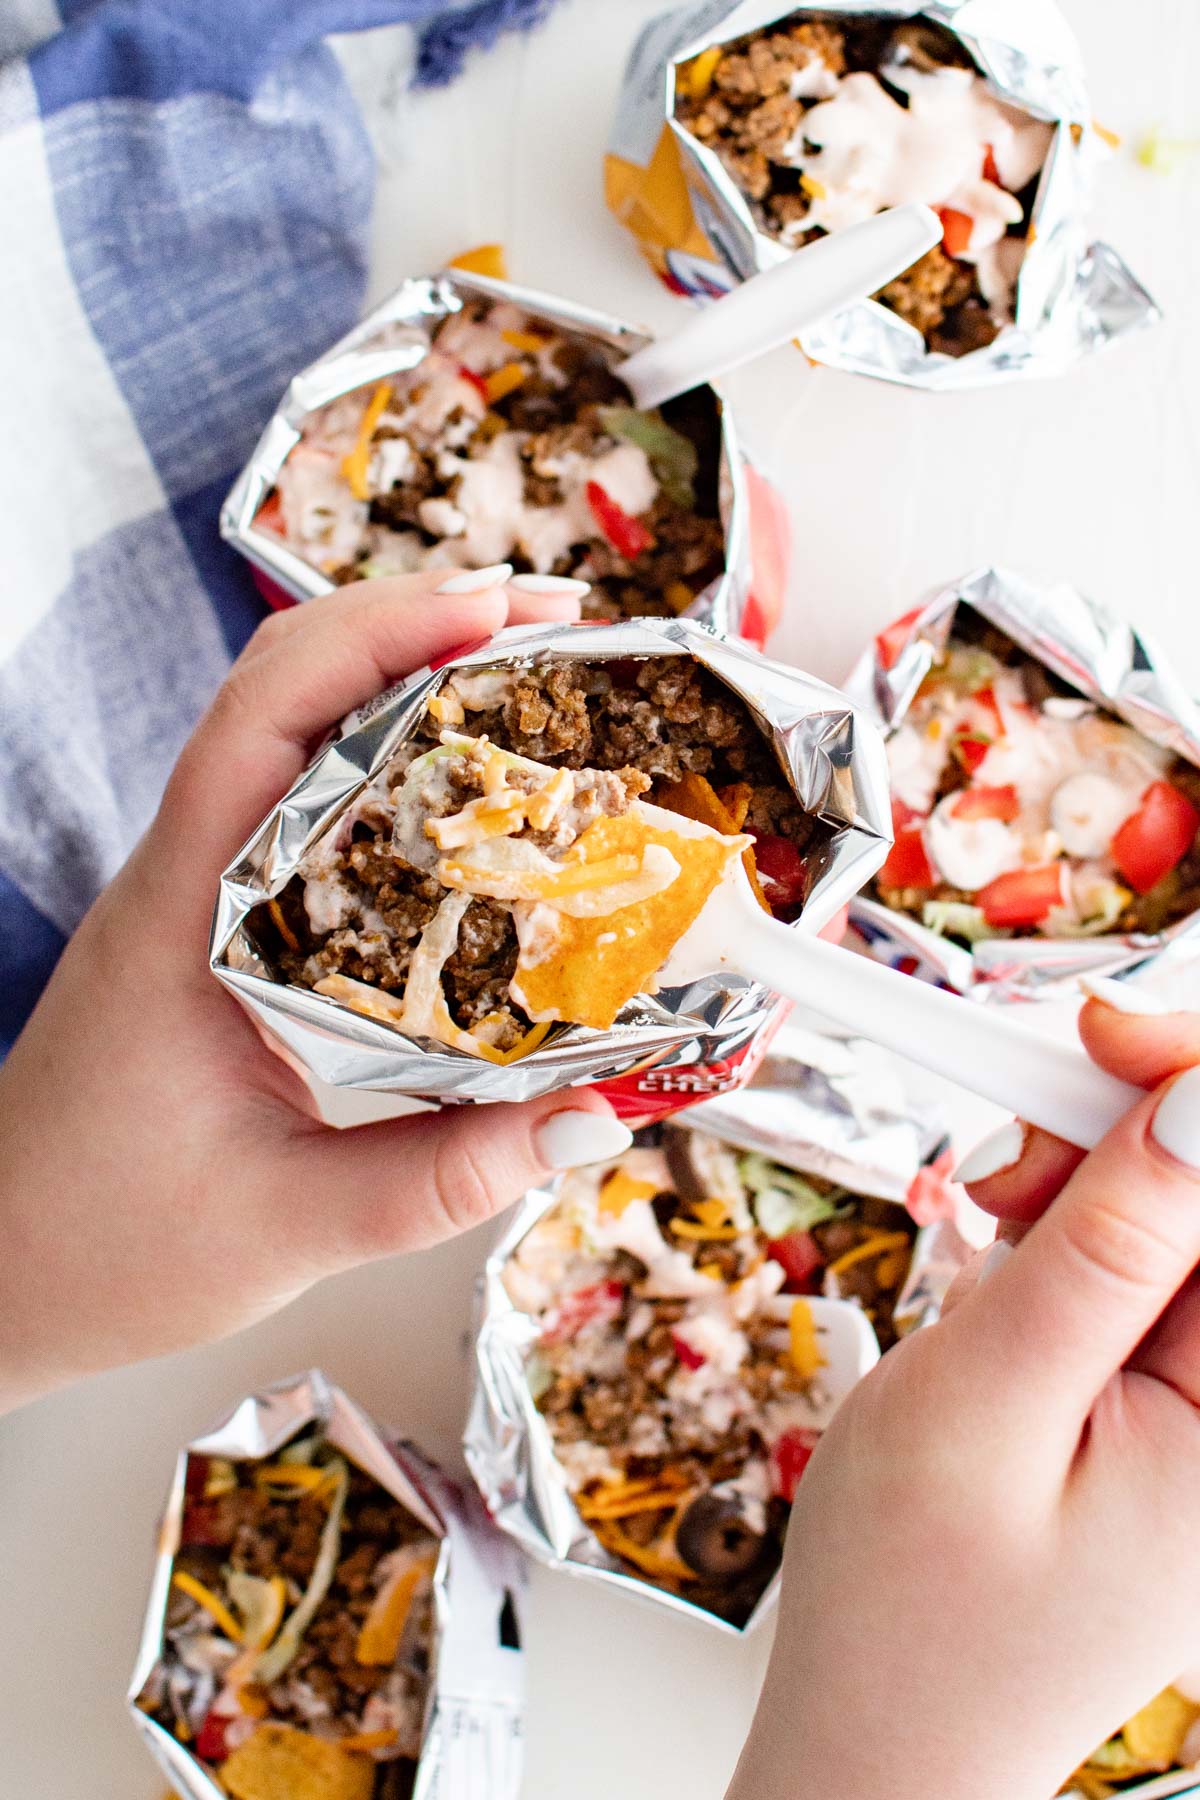 chip bags, hands holding a bag with taco meat, cheese